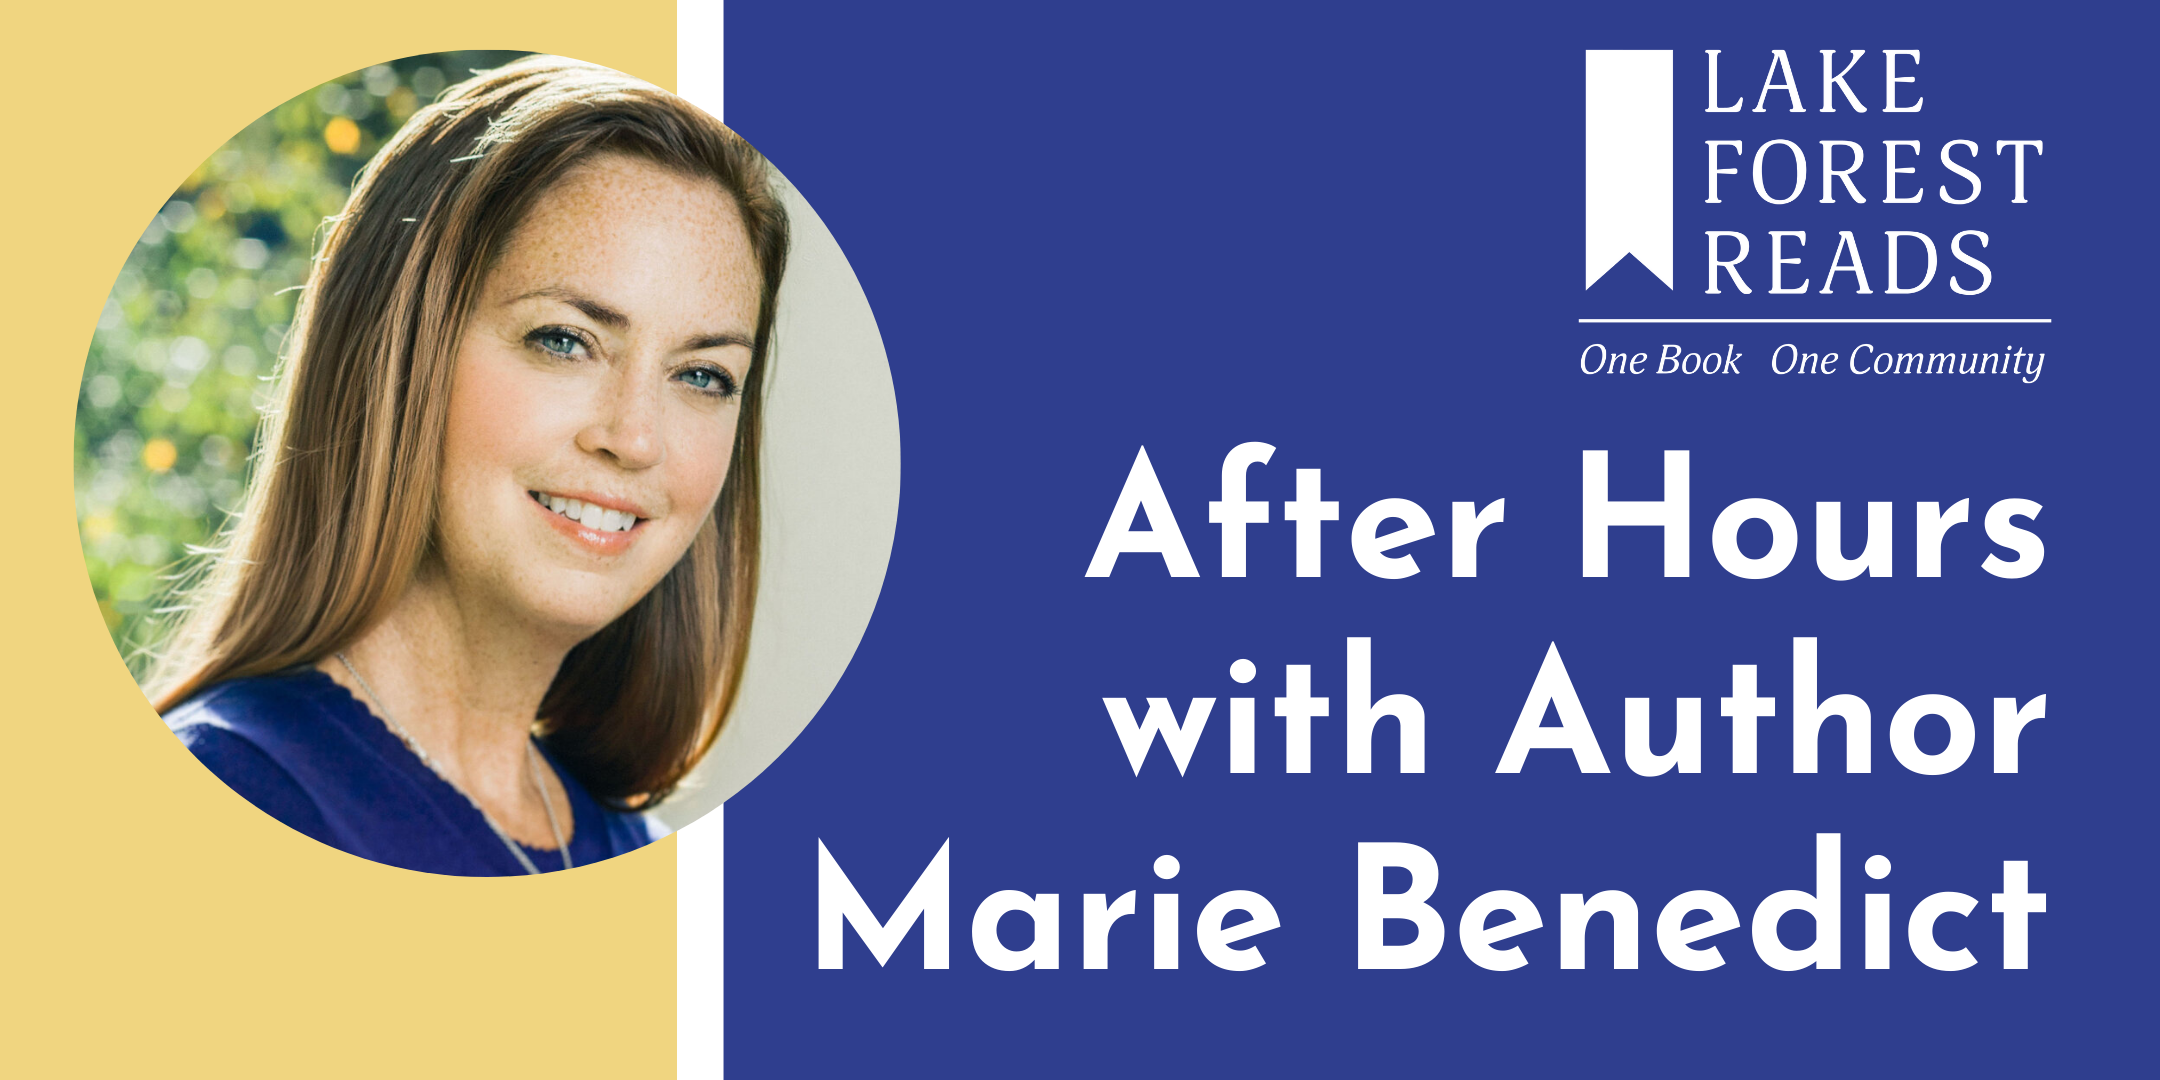 image of "After Hours with Author Marie Benedict"